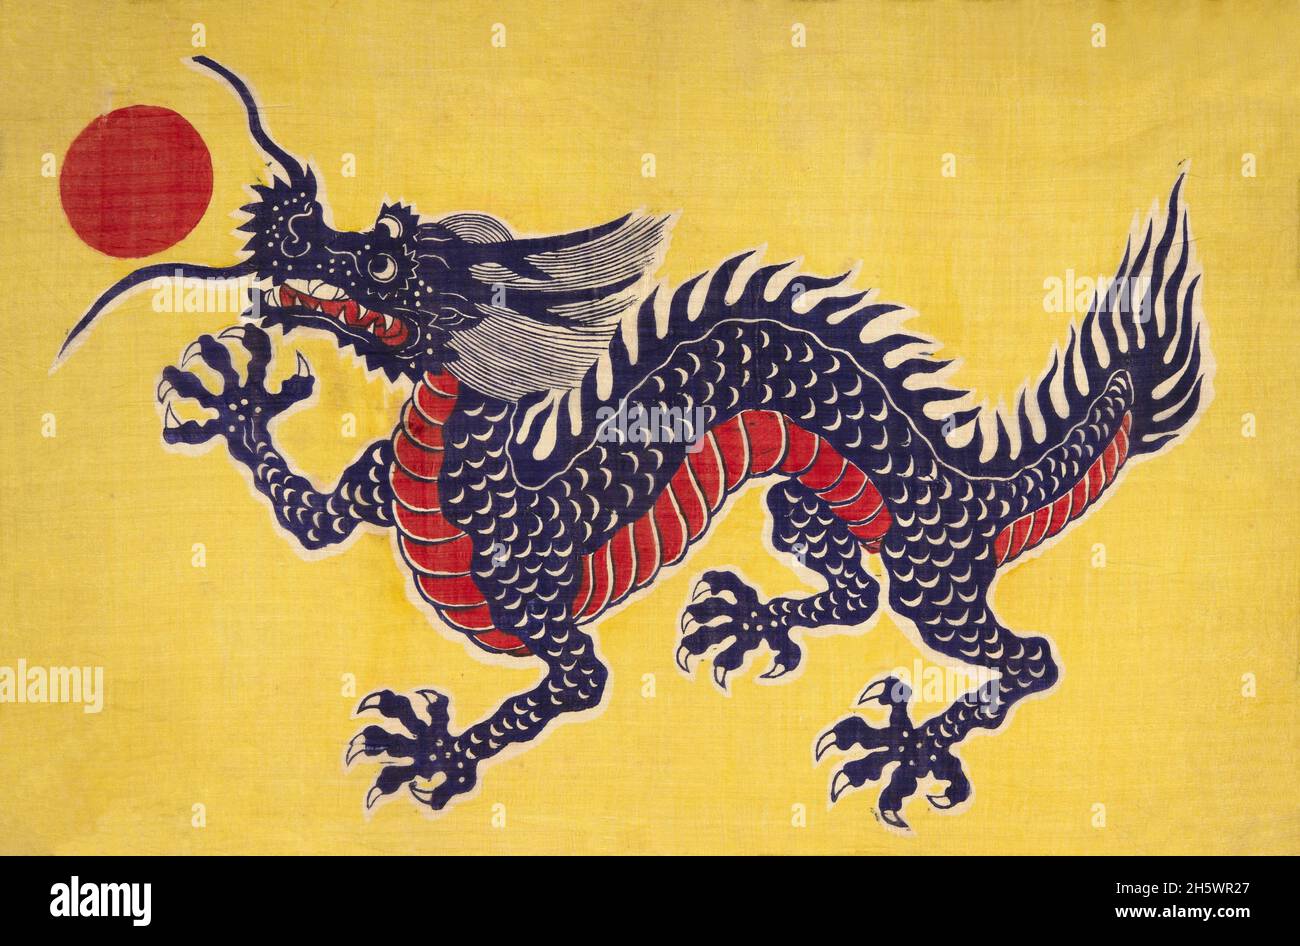 Silk flag depicting a dragon . Emblem of the Chinese Empire during the Ch'ing Dynasty. Yellow-printed silk with five-clawed imperial dragon depicted in purplish blue. Belly scales are red. This type of flag was in use from 1889-1911. Prior to that, flags were usually rectangular-triangular.? Stock Photo